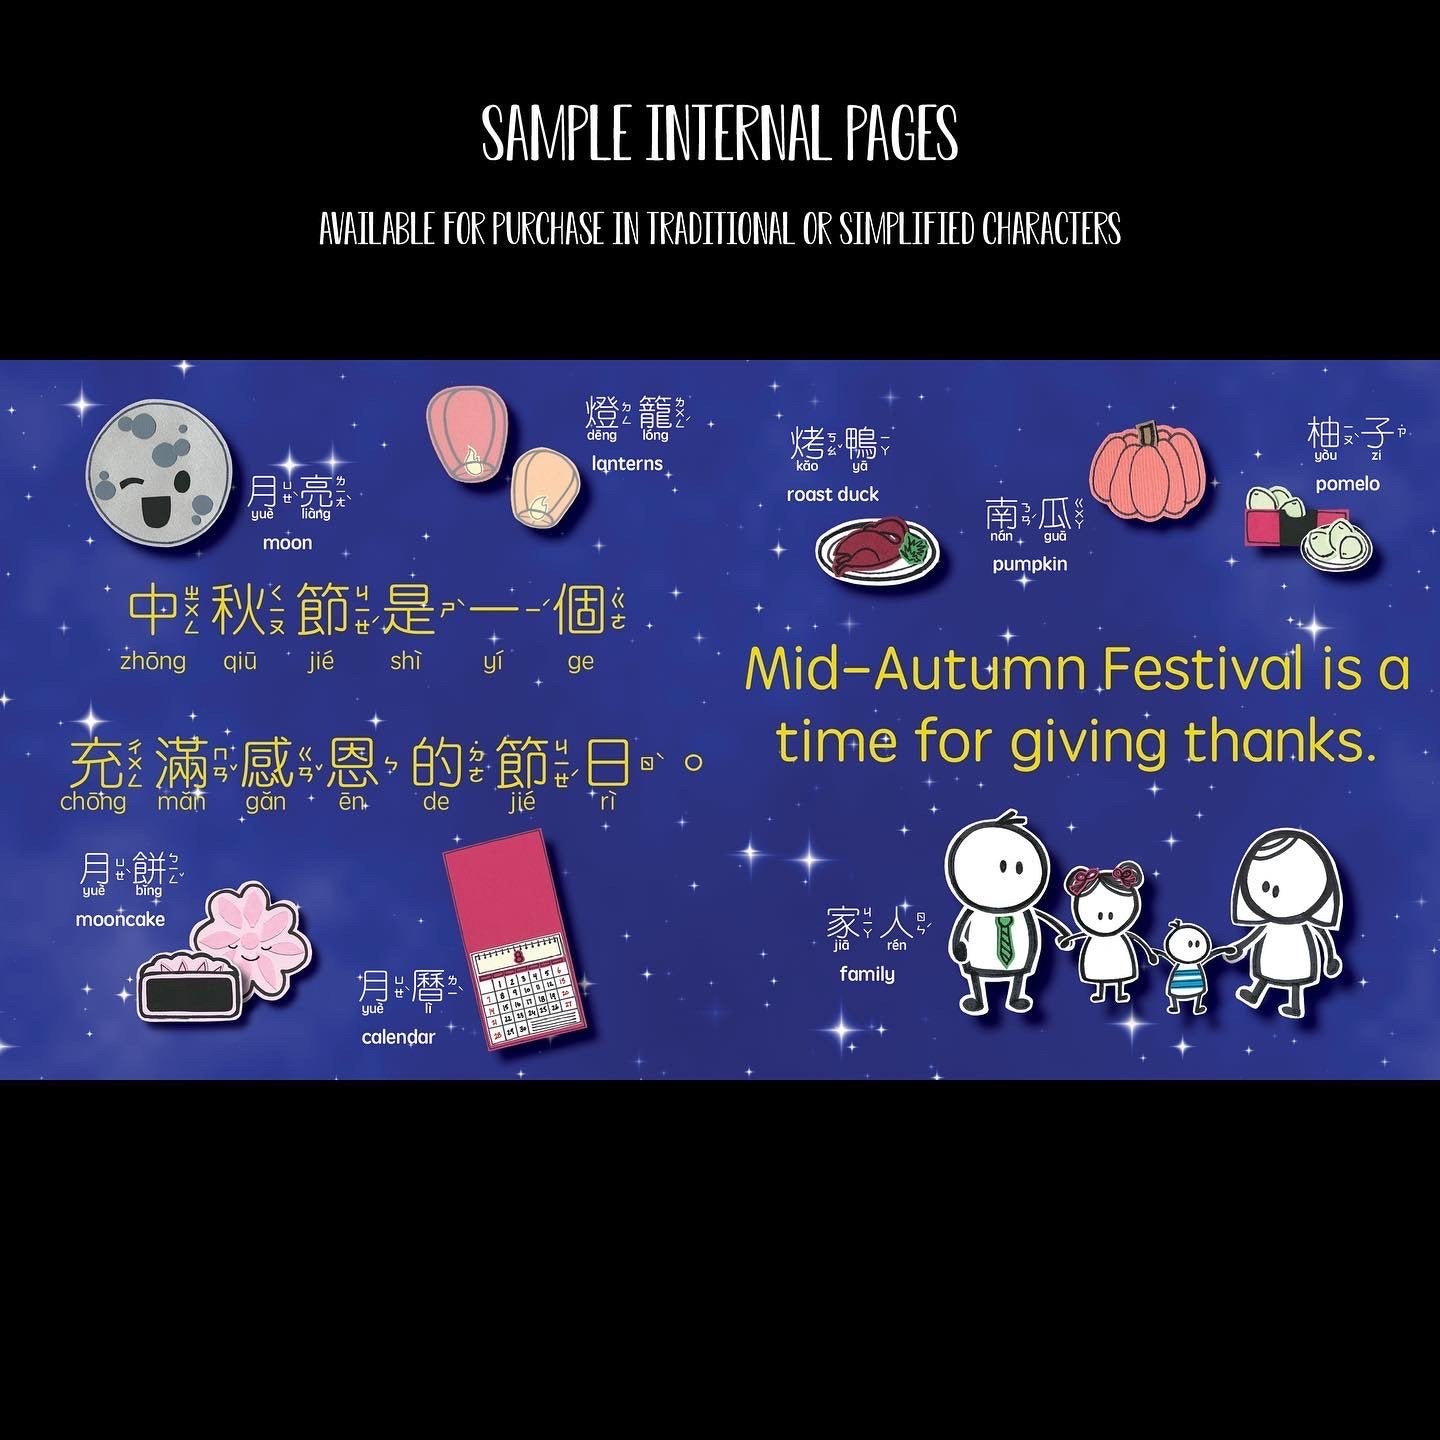 Mid-Autumn Festival is a time for giving thanks. 中秋節是一個充滿感恩的節日.  Pictures of moon, lanterns, roast duck, pumpkin, pomelo, mooncake, calendar, and family.  月亮, 燈籠, 烤鴨, 南瓜, 柚子, 月餅, 月曆, 家人.